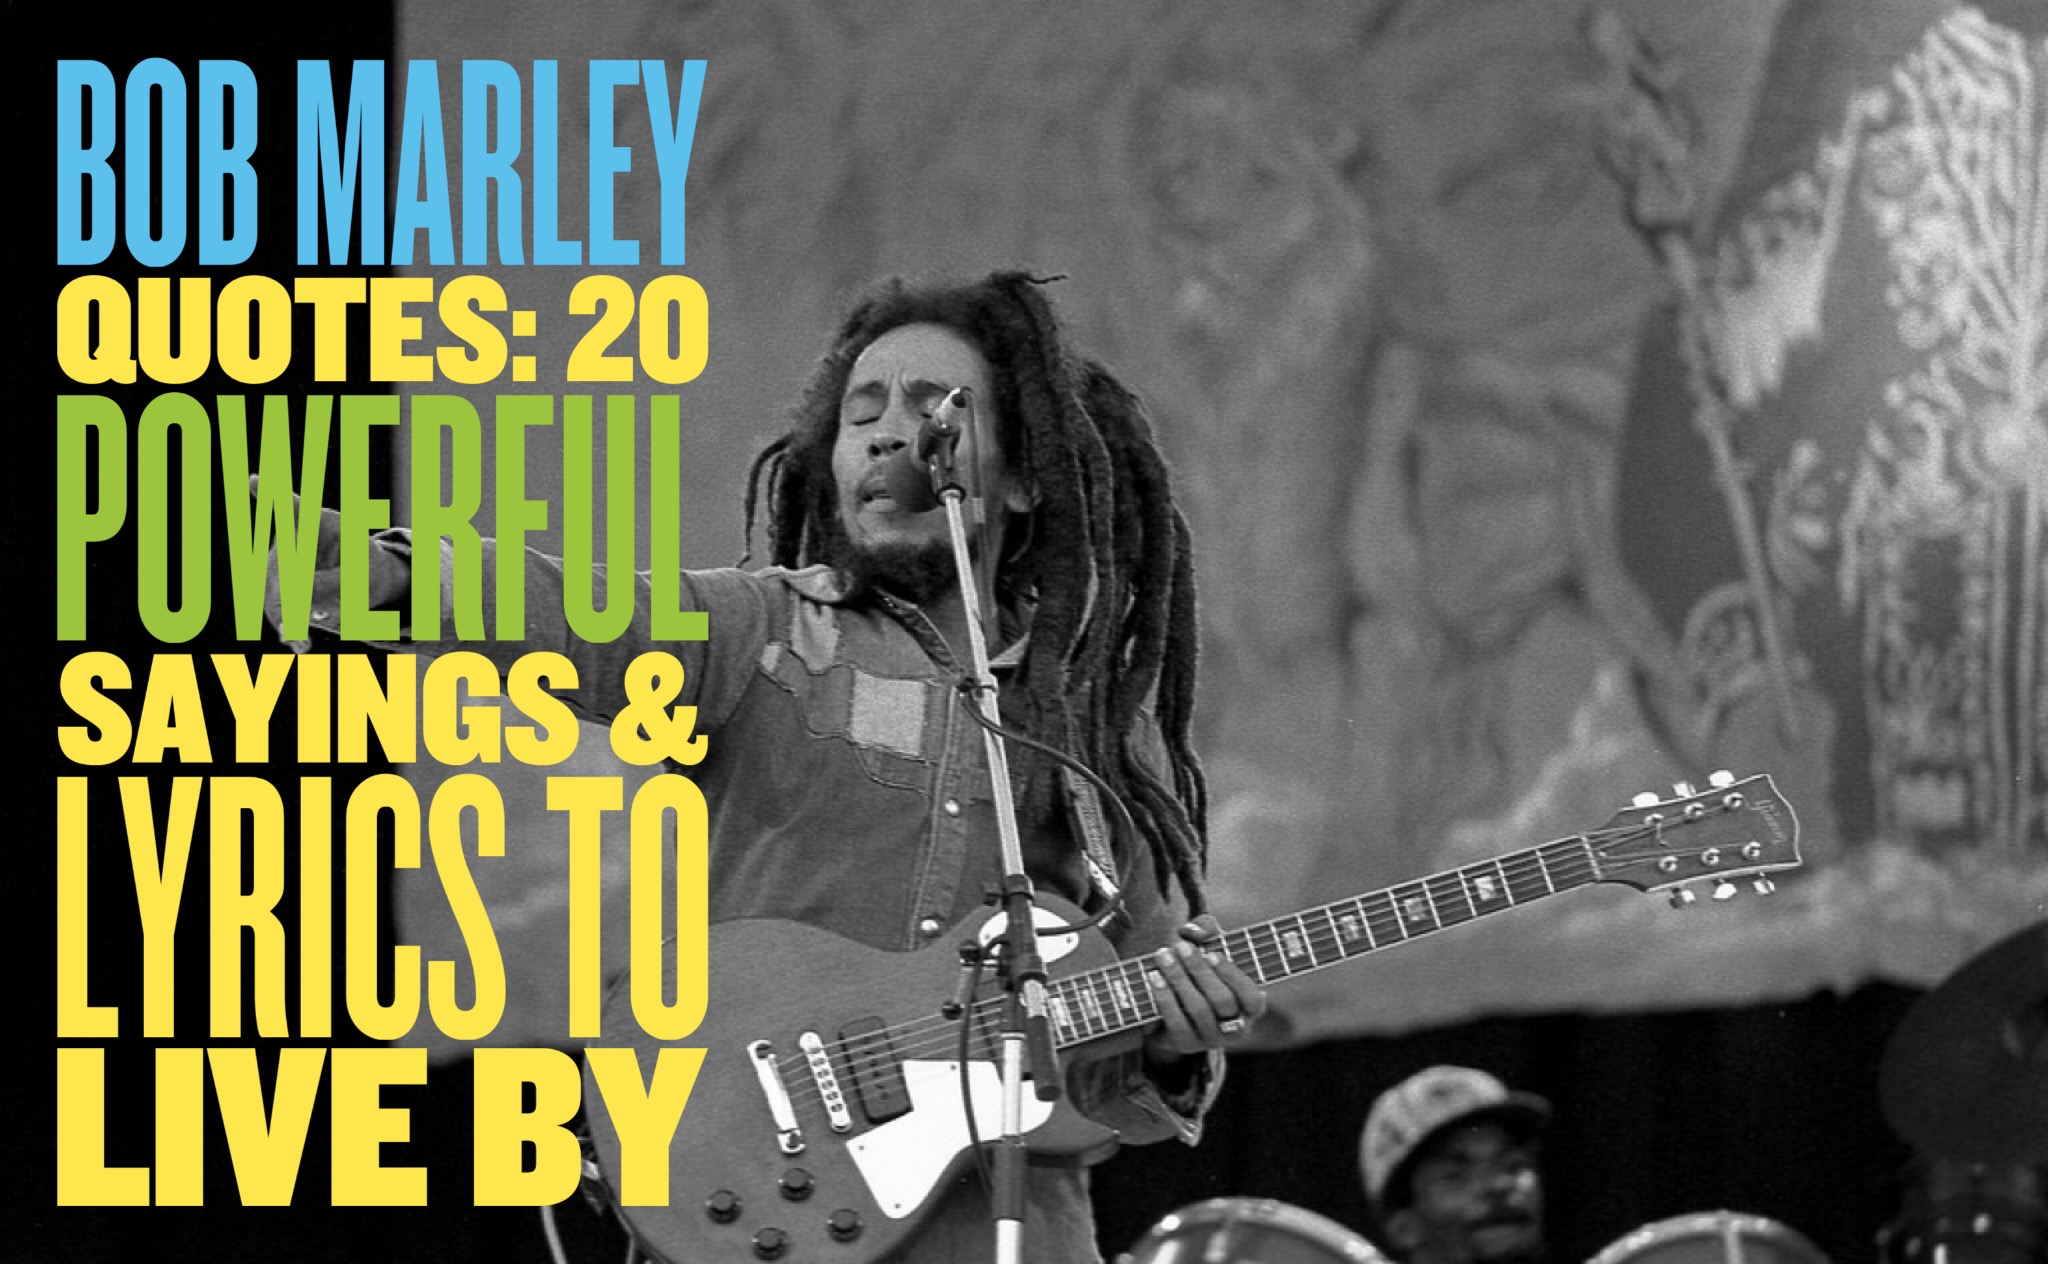 Bob Marley Quotes: 20 Powerful Sayings & Lyrics To Live By